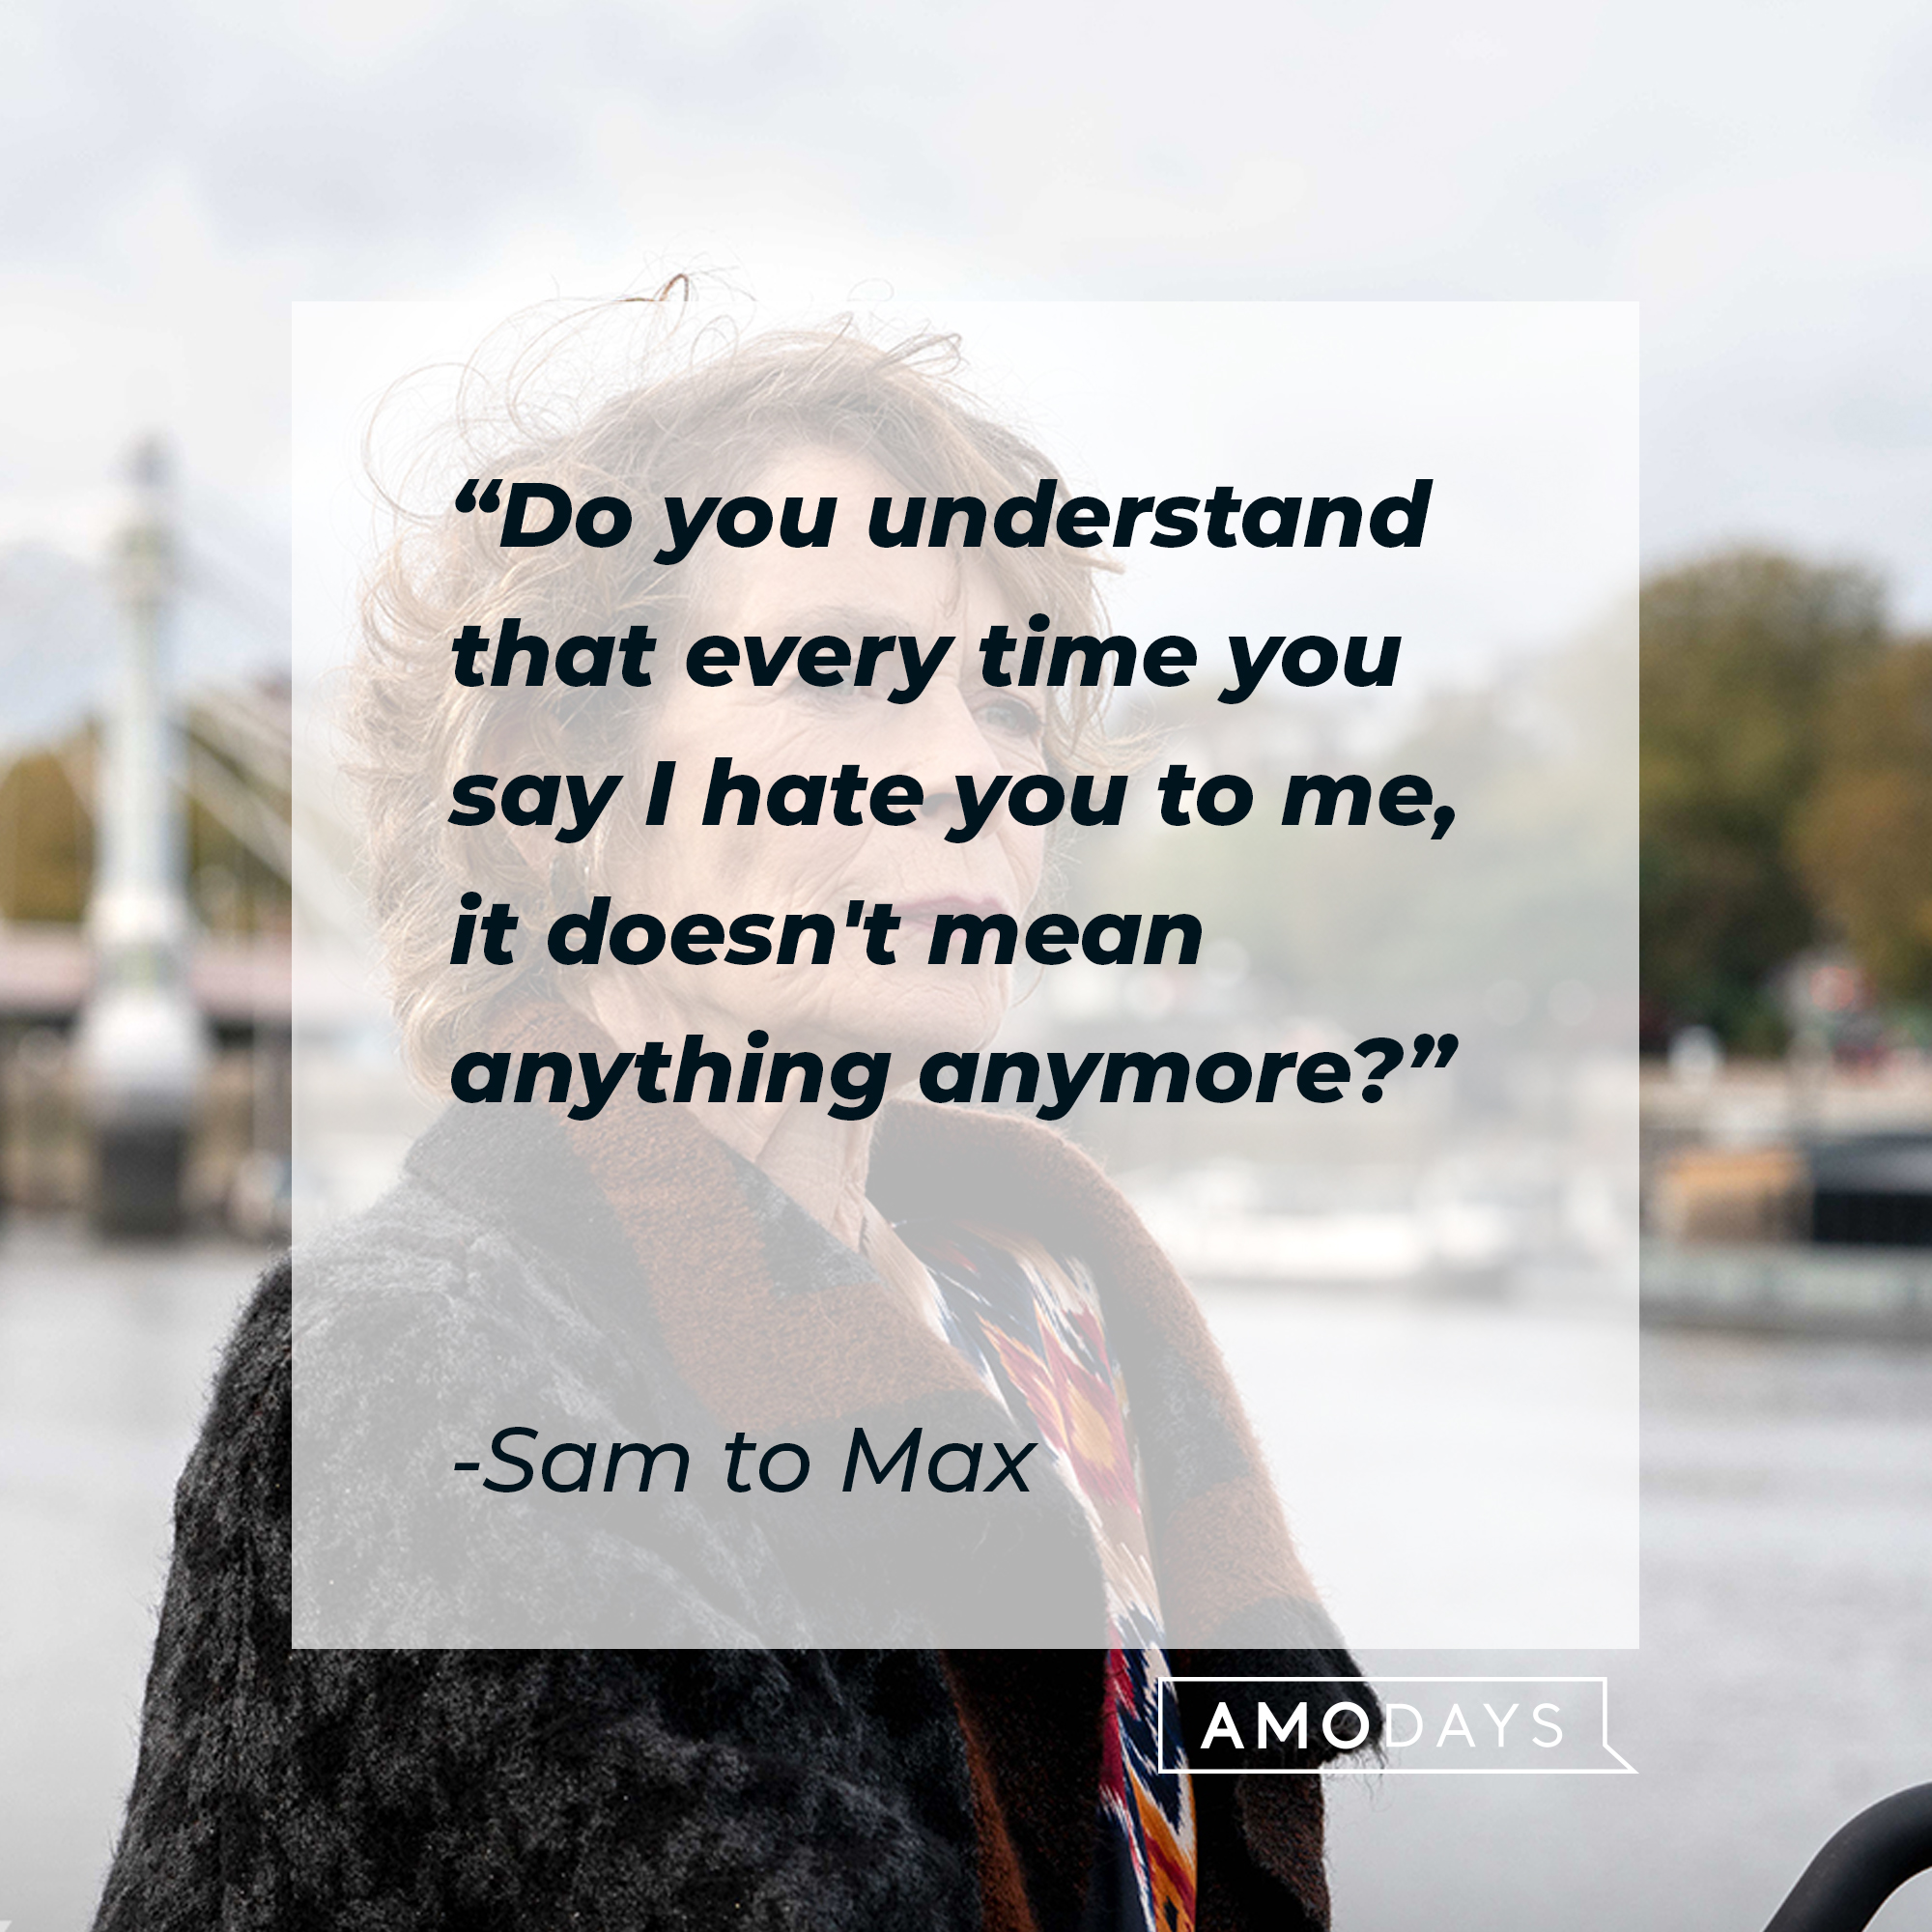 Sam's quote to Max: "Do you understand that every time you say I hate you to me, it doesn't mean anything anymore?" | Source: facebook.com/BetterThingsFX